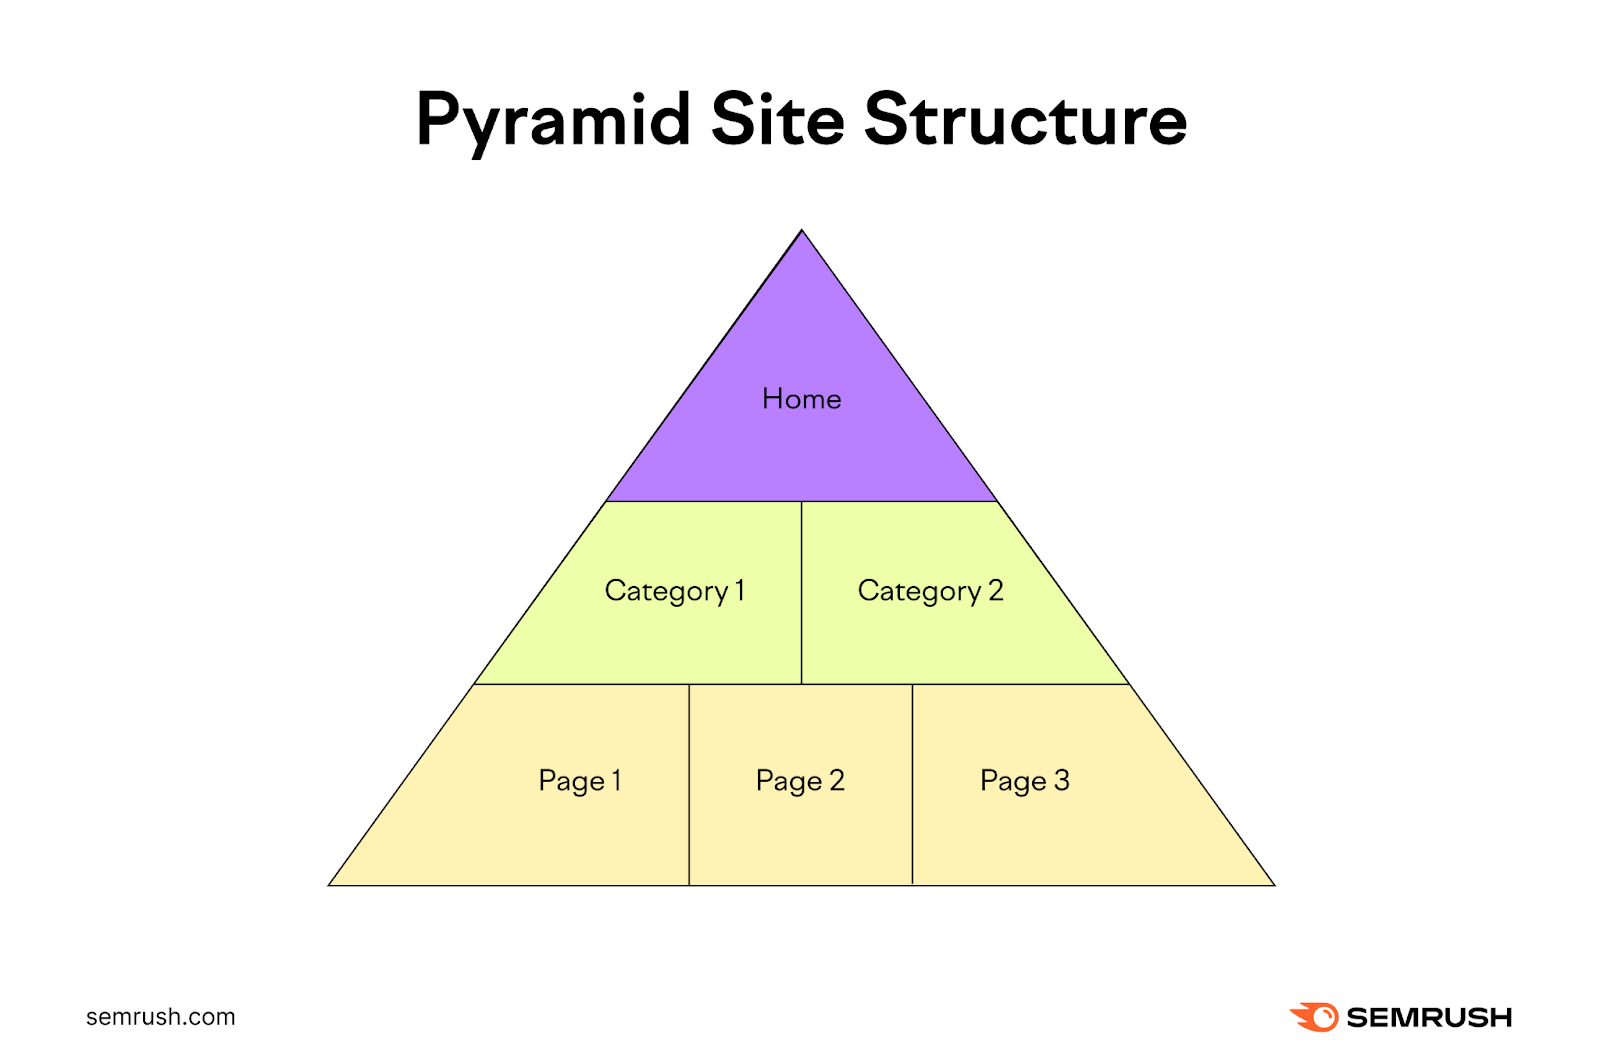 A pyramid site structure